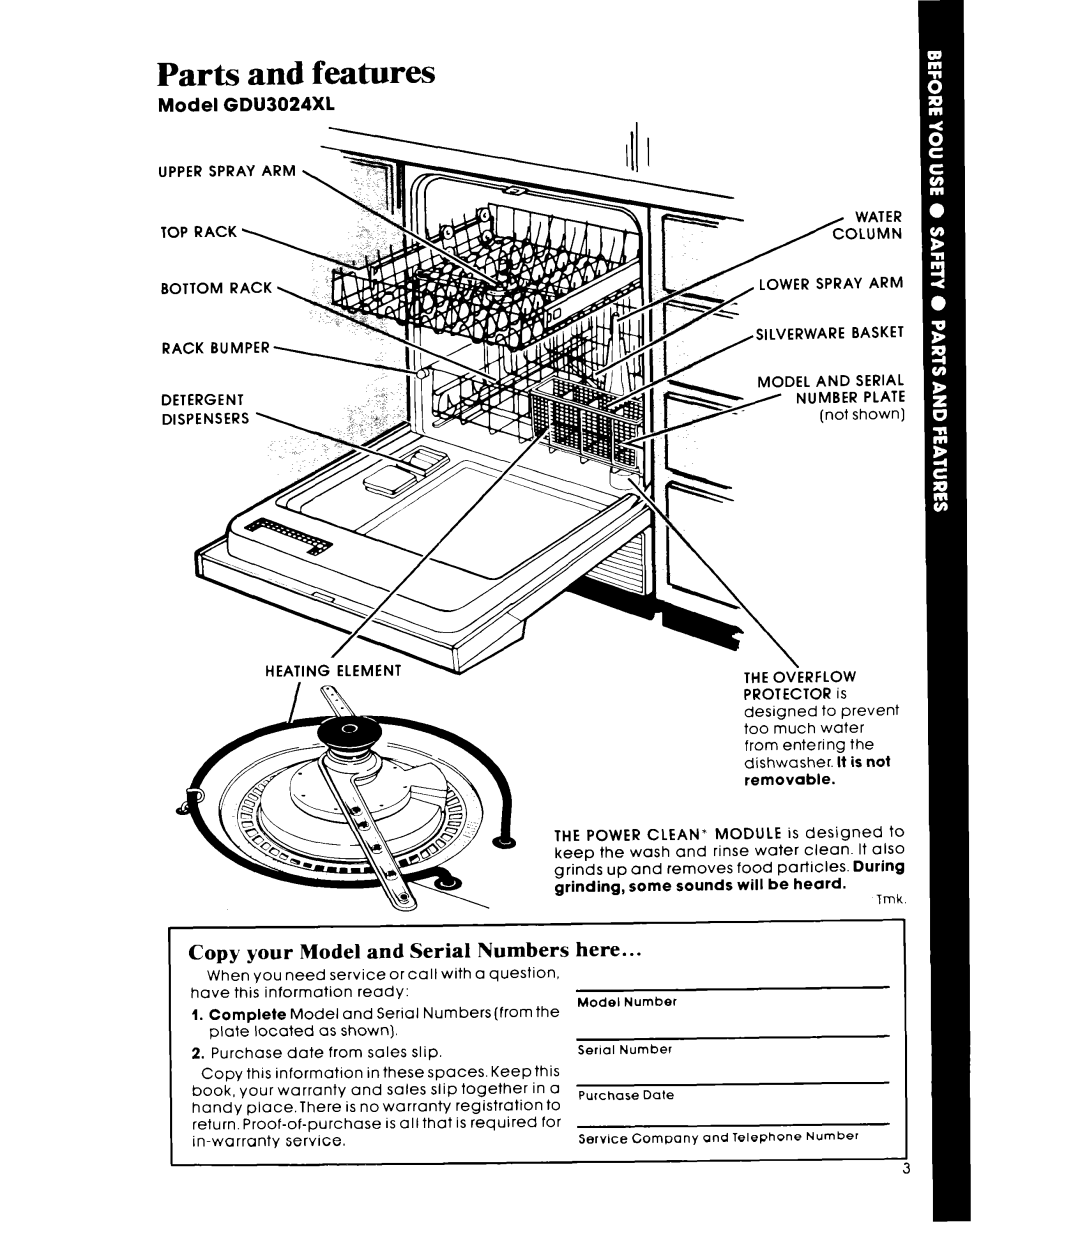 Whirlpool manual Parts and features, Copy your Model and Serial Numbers here, Model GDU3024XL 